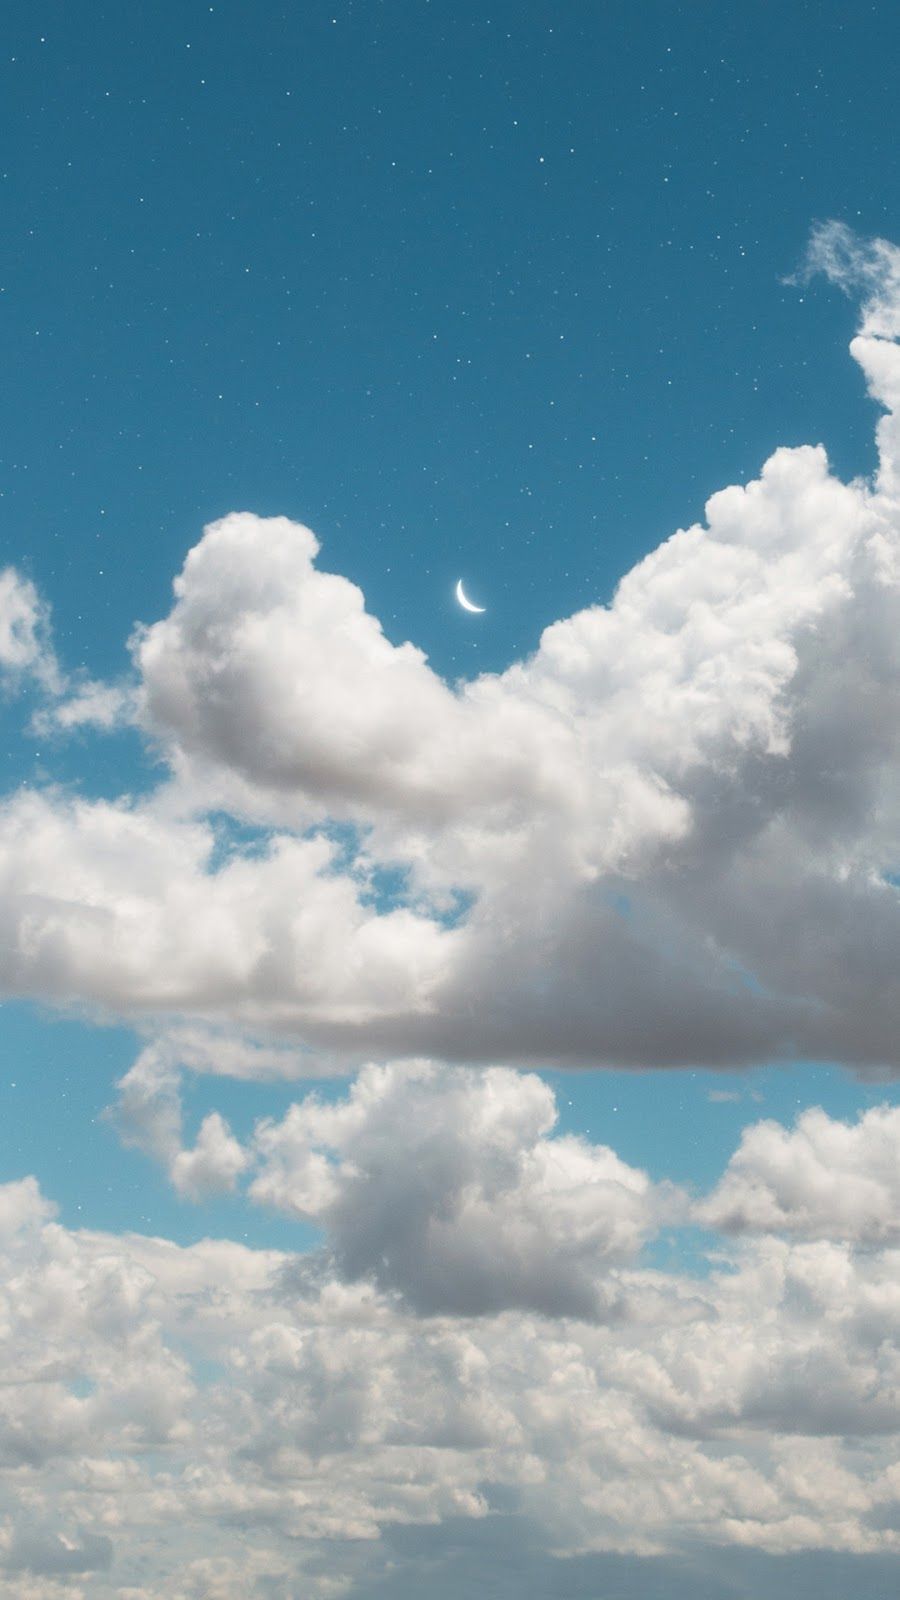 Crescent moon in the blue sky #wallpaper #iphone #android #background #followme. Blue sky wallpaper, Sky aesthetic, Beautiful wallpaper background